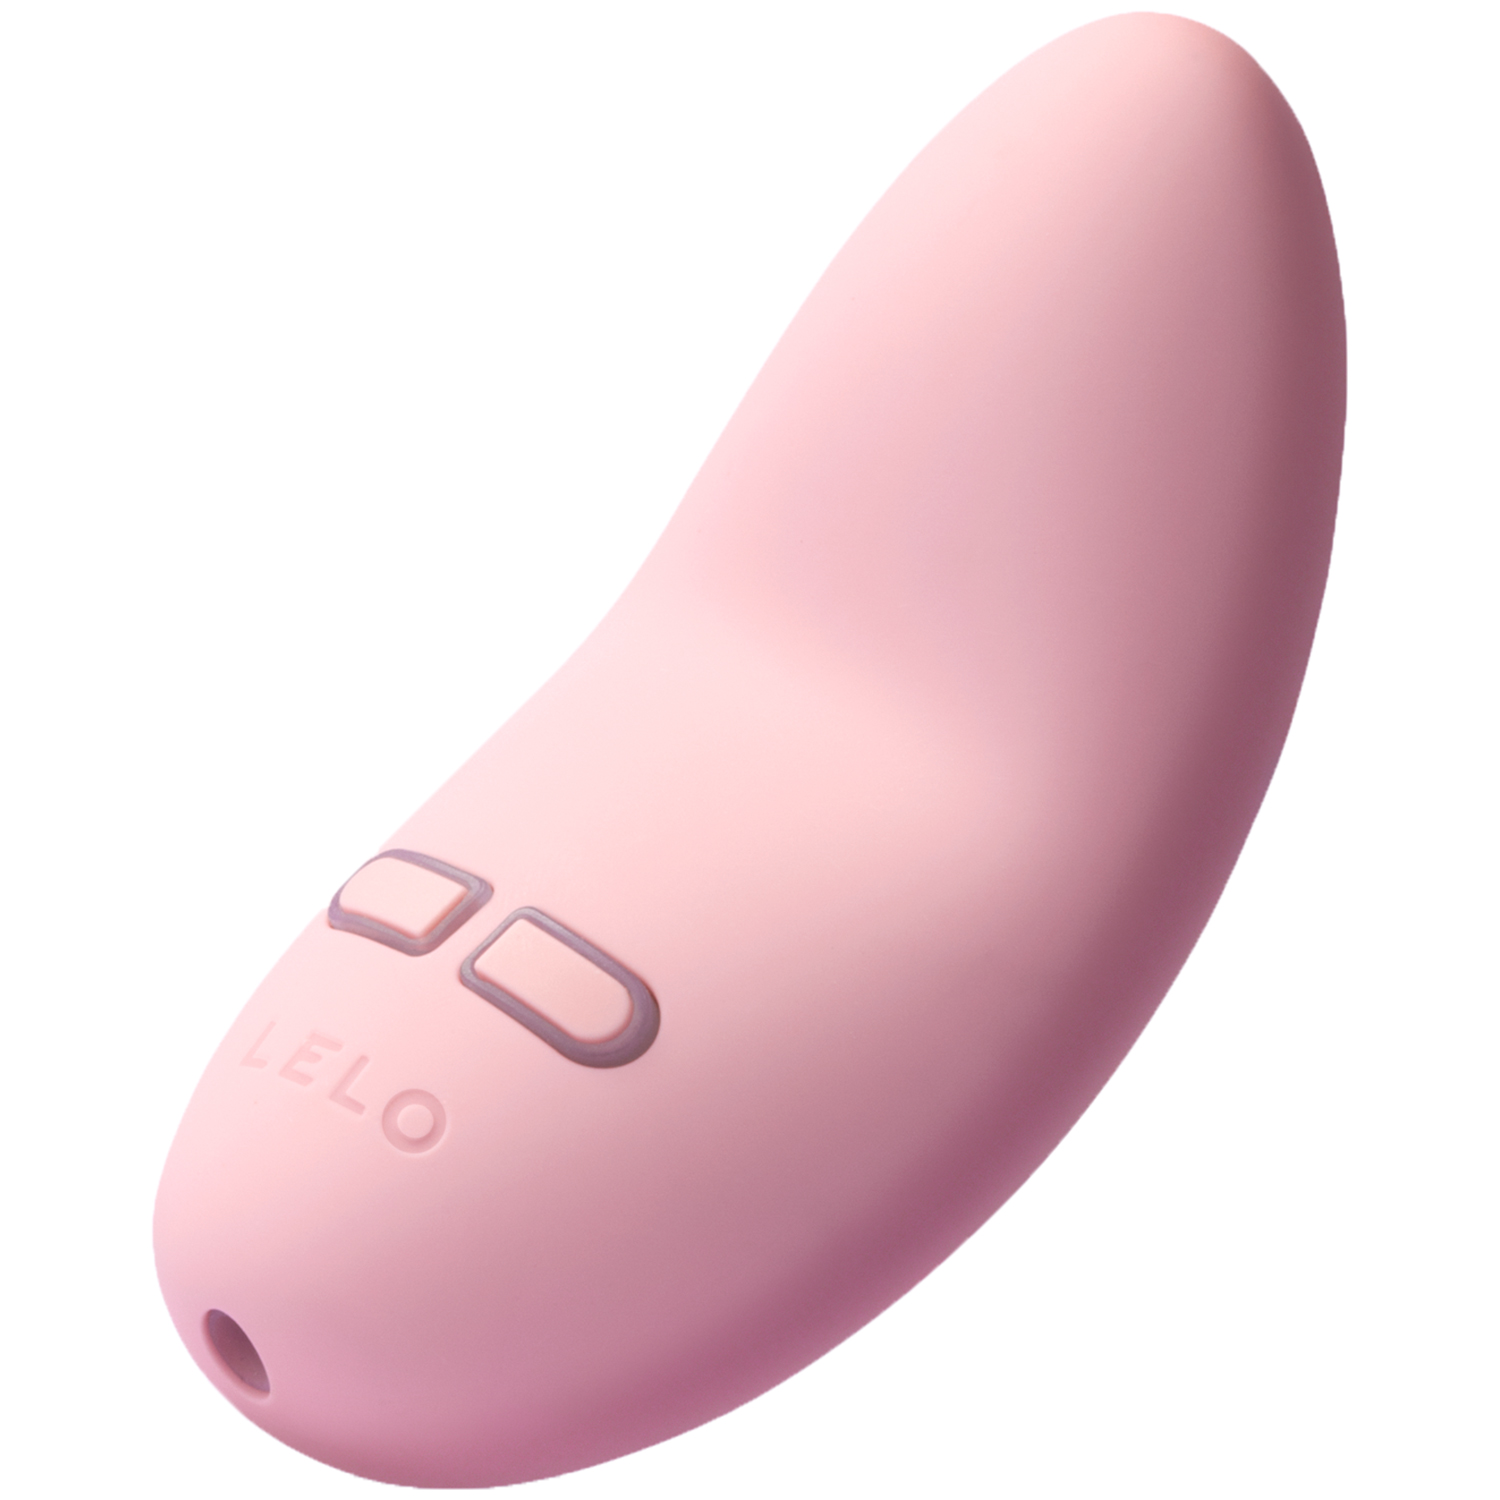 Lelo LILY 2 Personal Massager      - Rosa